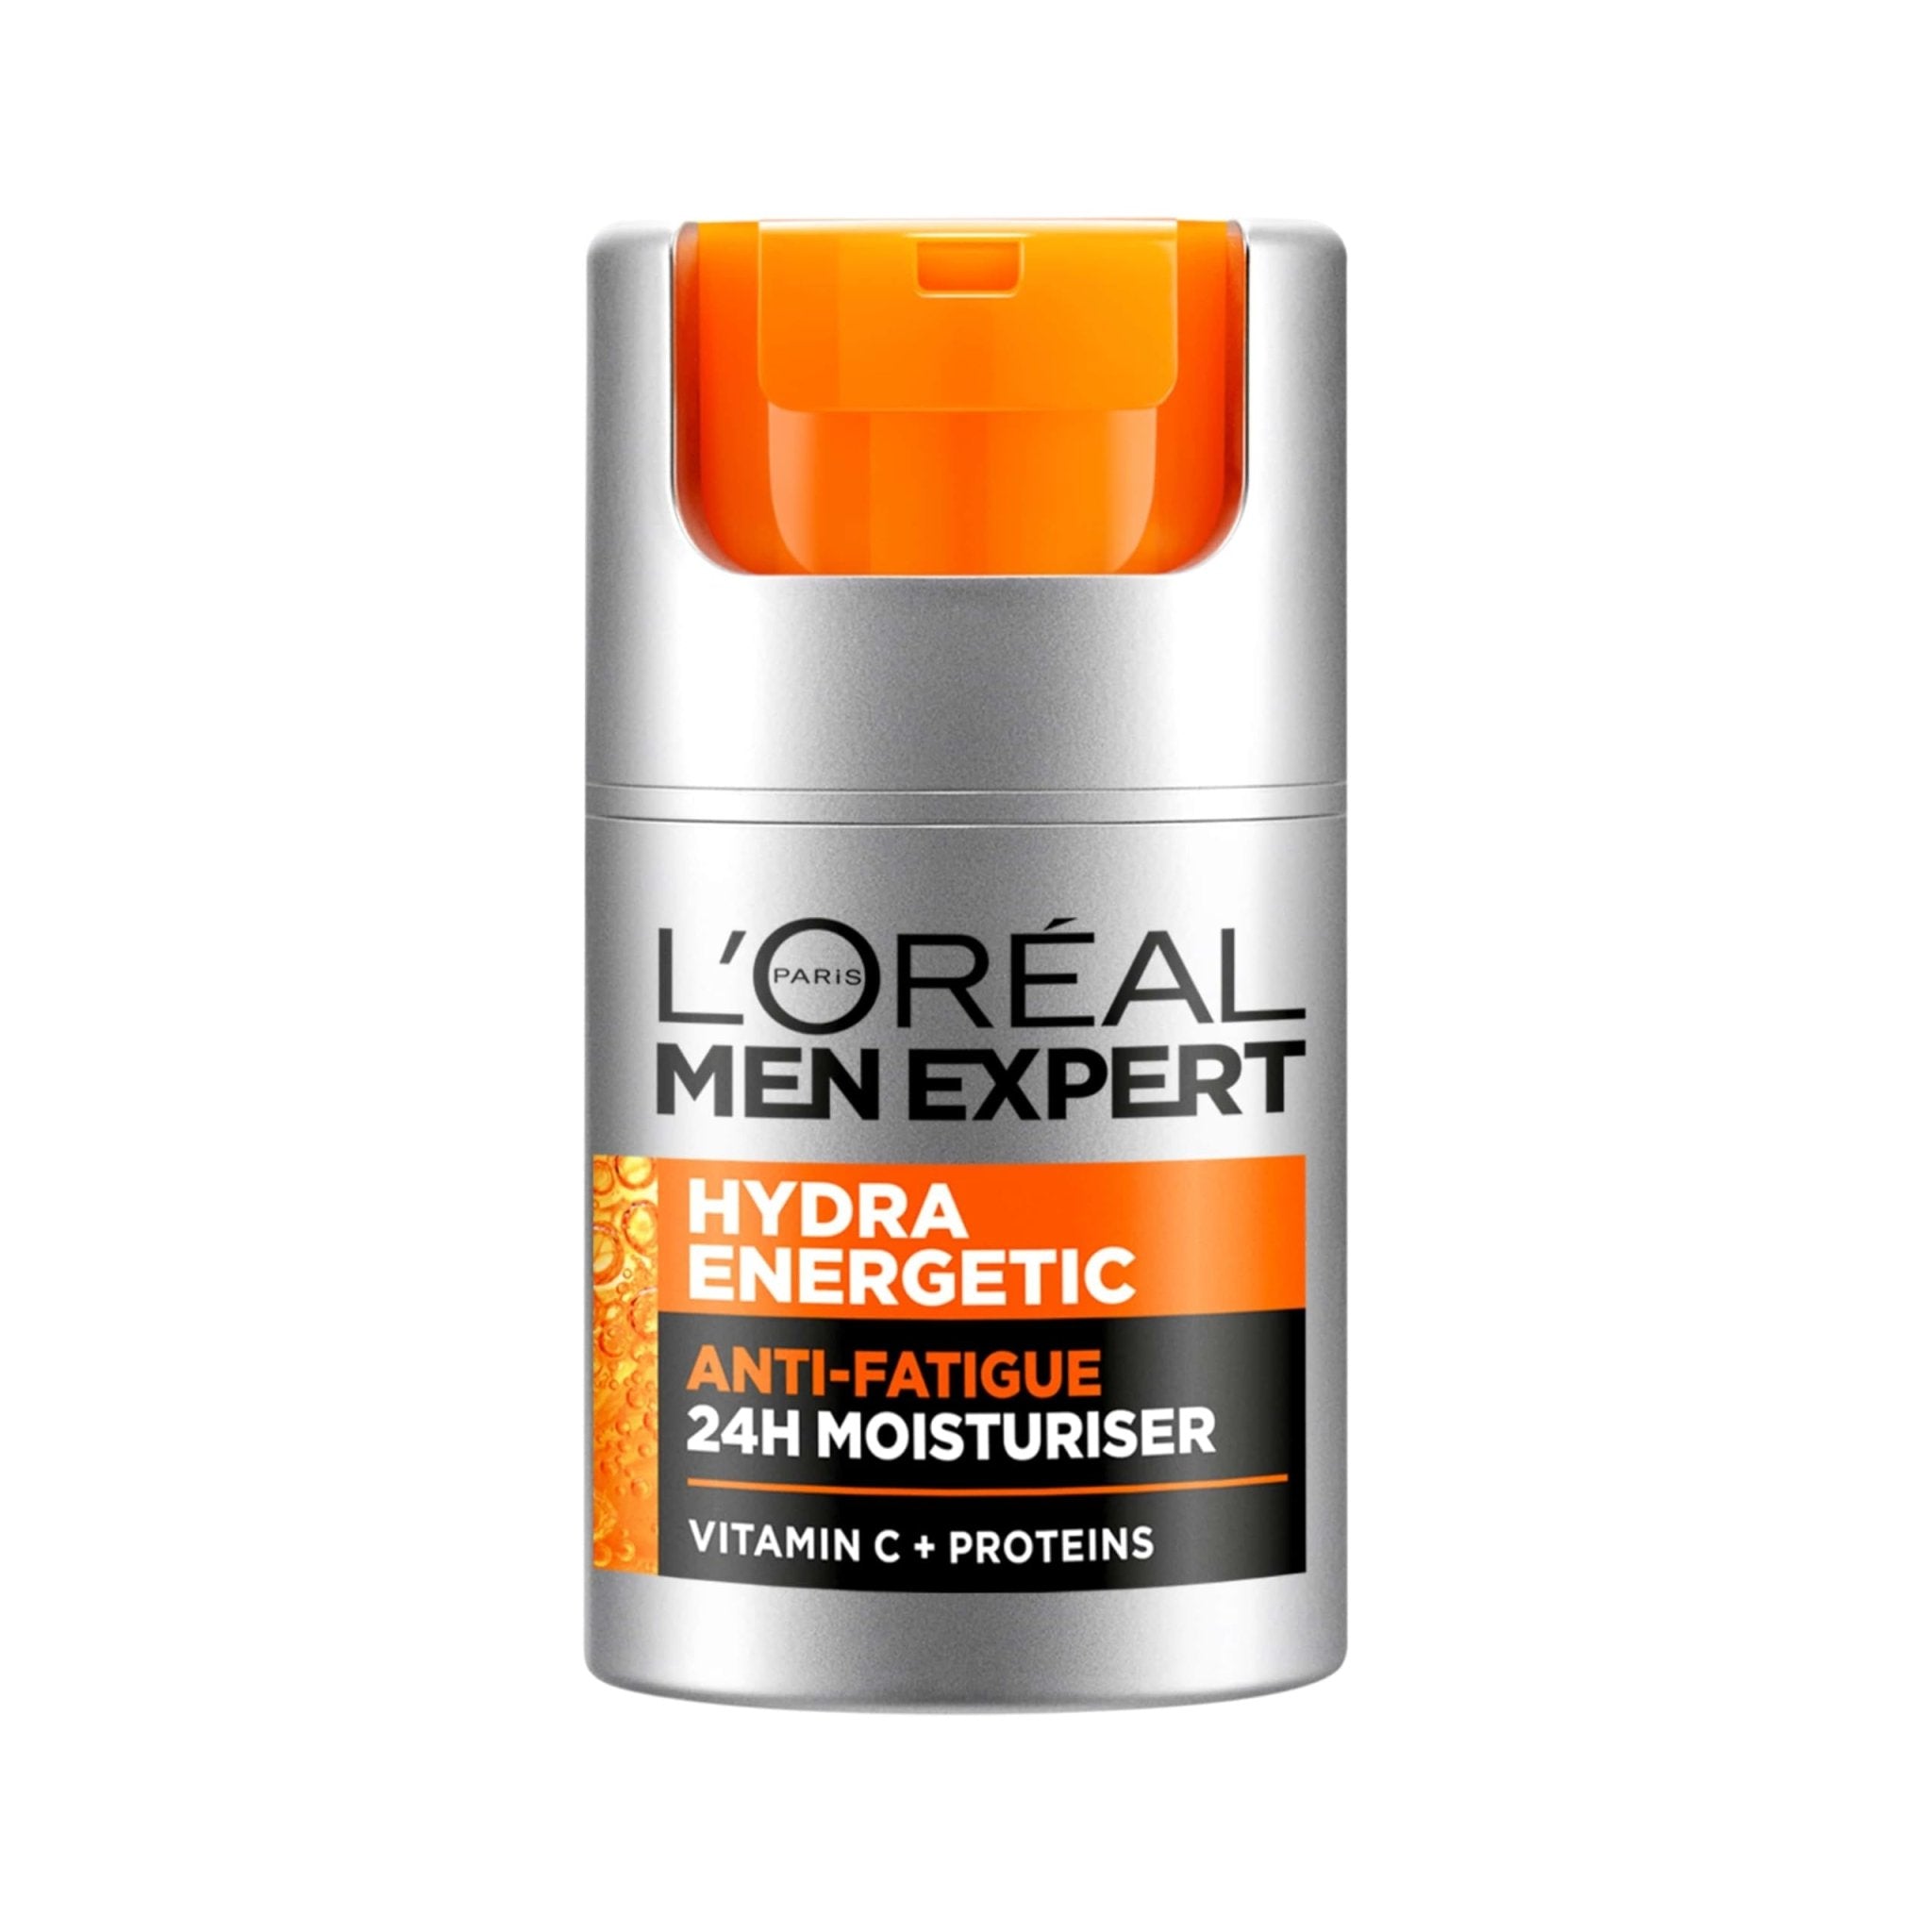 L'Oreal Men Expert Anti - Fatigue Moisturiser, Hydra Energetic Mens Daily Moisturiser With Vitamin C: For Tired Looking Skin, Hydrates And Fights Against 5 Visible Signs Of Fatigue [50ml] - Ammpoure Wellbeing